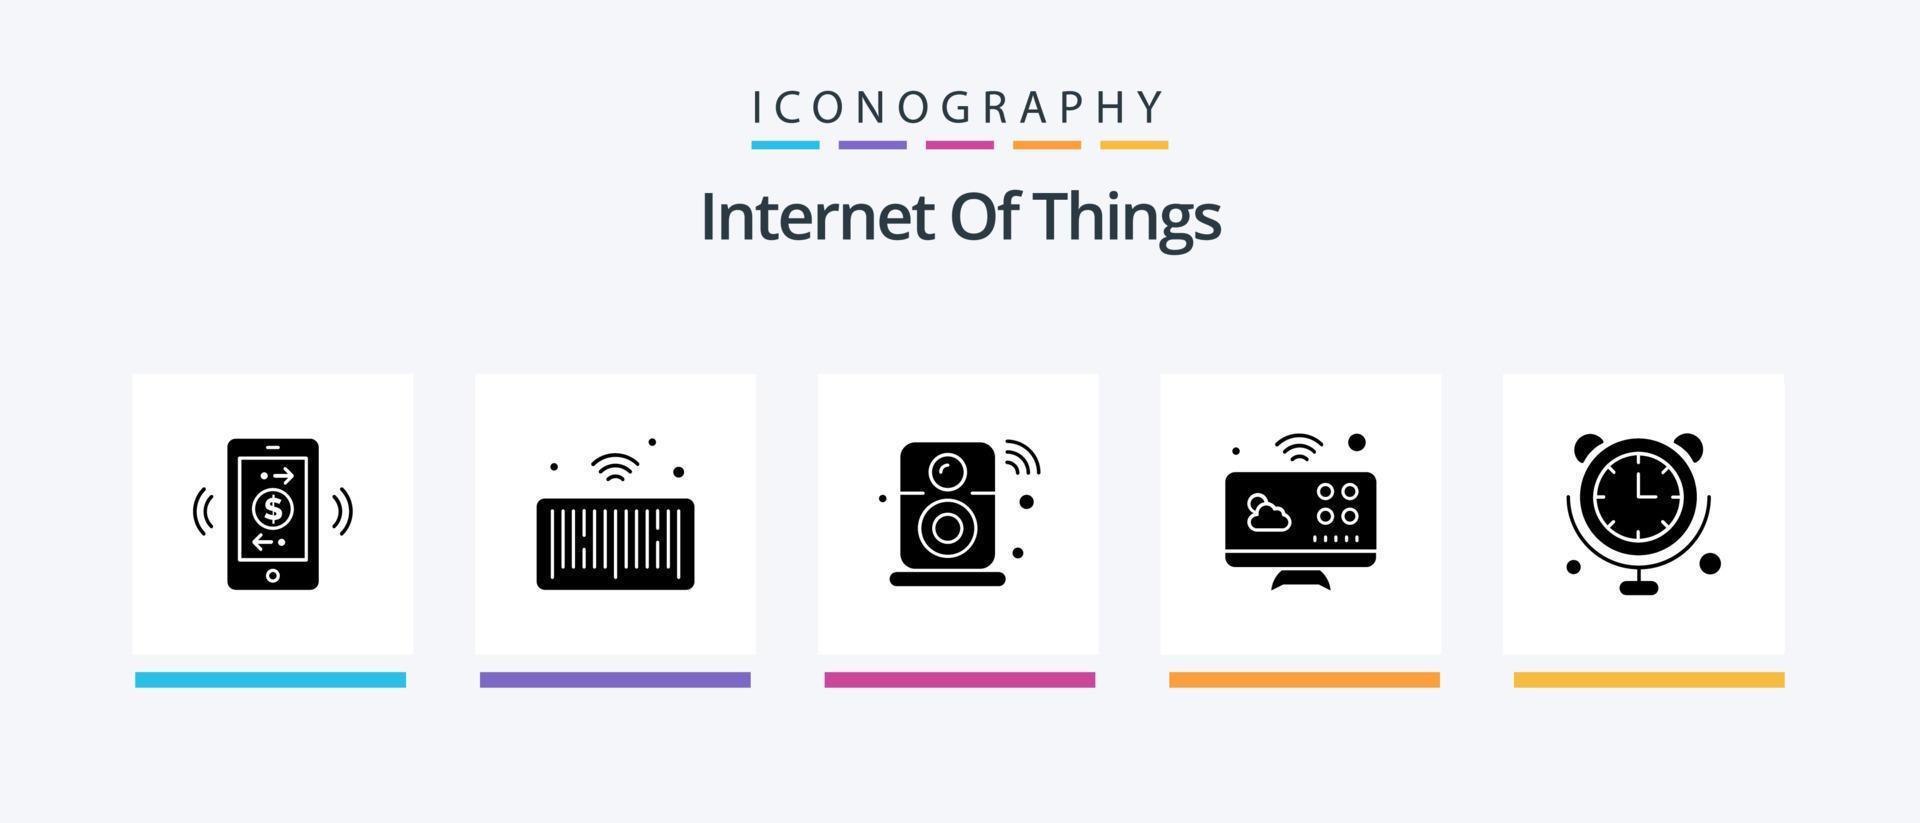 Internet Of Things Glyph 5 Icon Pack Including clock. monitor. speaker. connections. wifi. Creative Icons Design vector